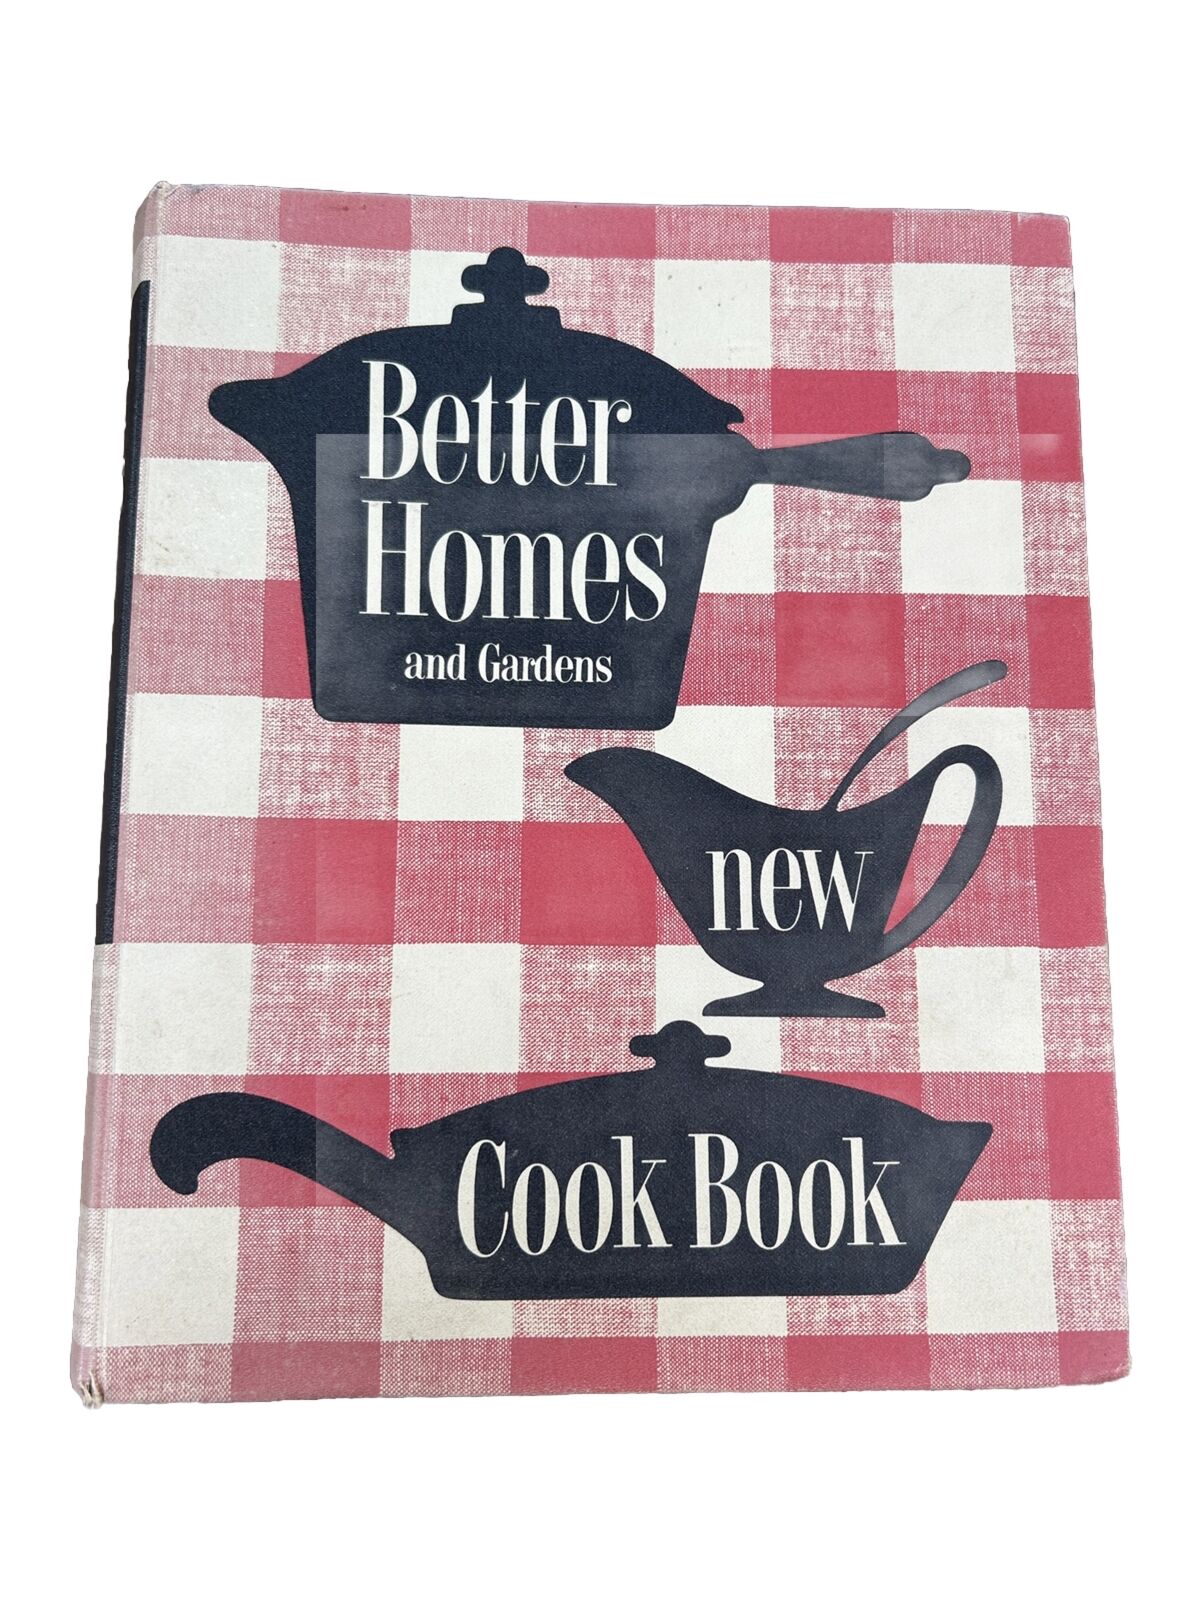 VTG 1953 1st Ed. Fourth Printing Better Homes and Gardens Cook Book 5 Rings 